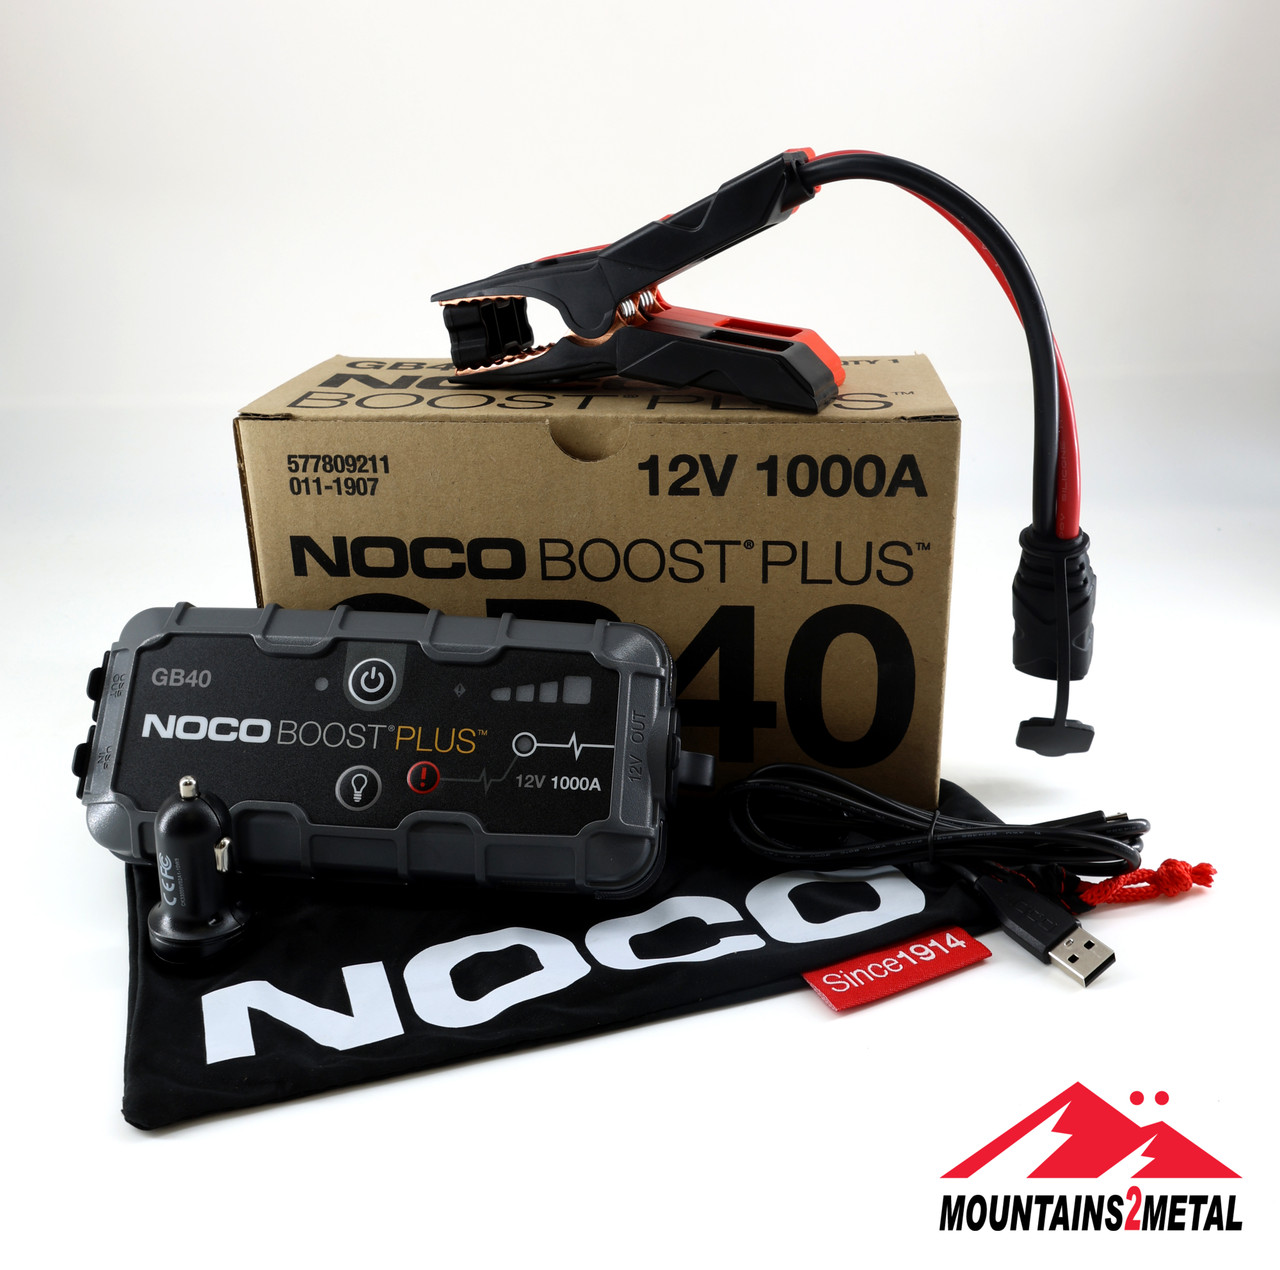 NOCO Boost 12V 1000A Jump Starter (GB40), Boosters, Chargers & Accessories